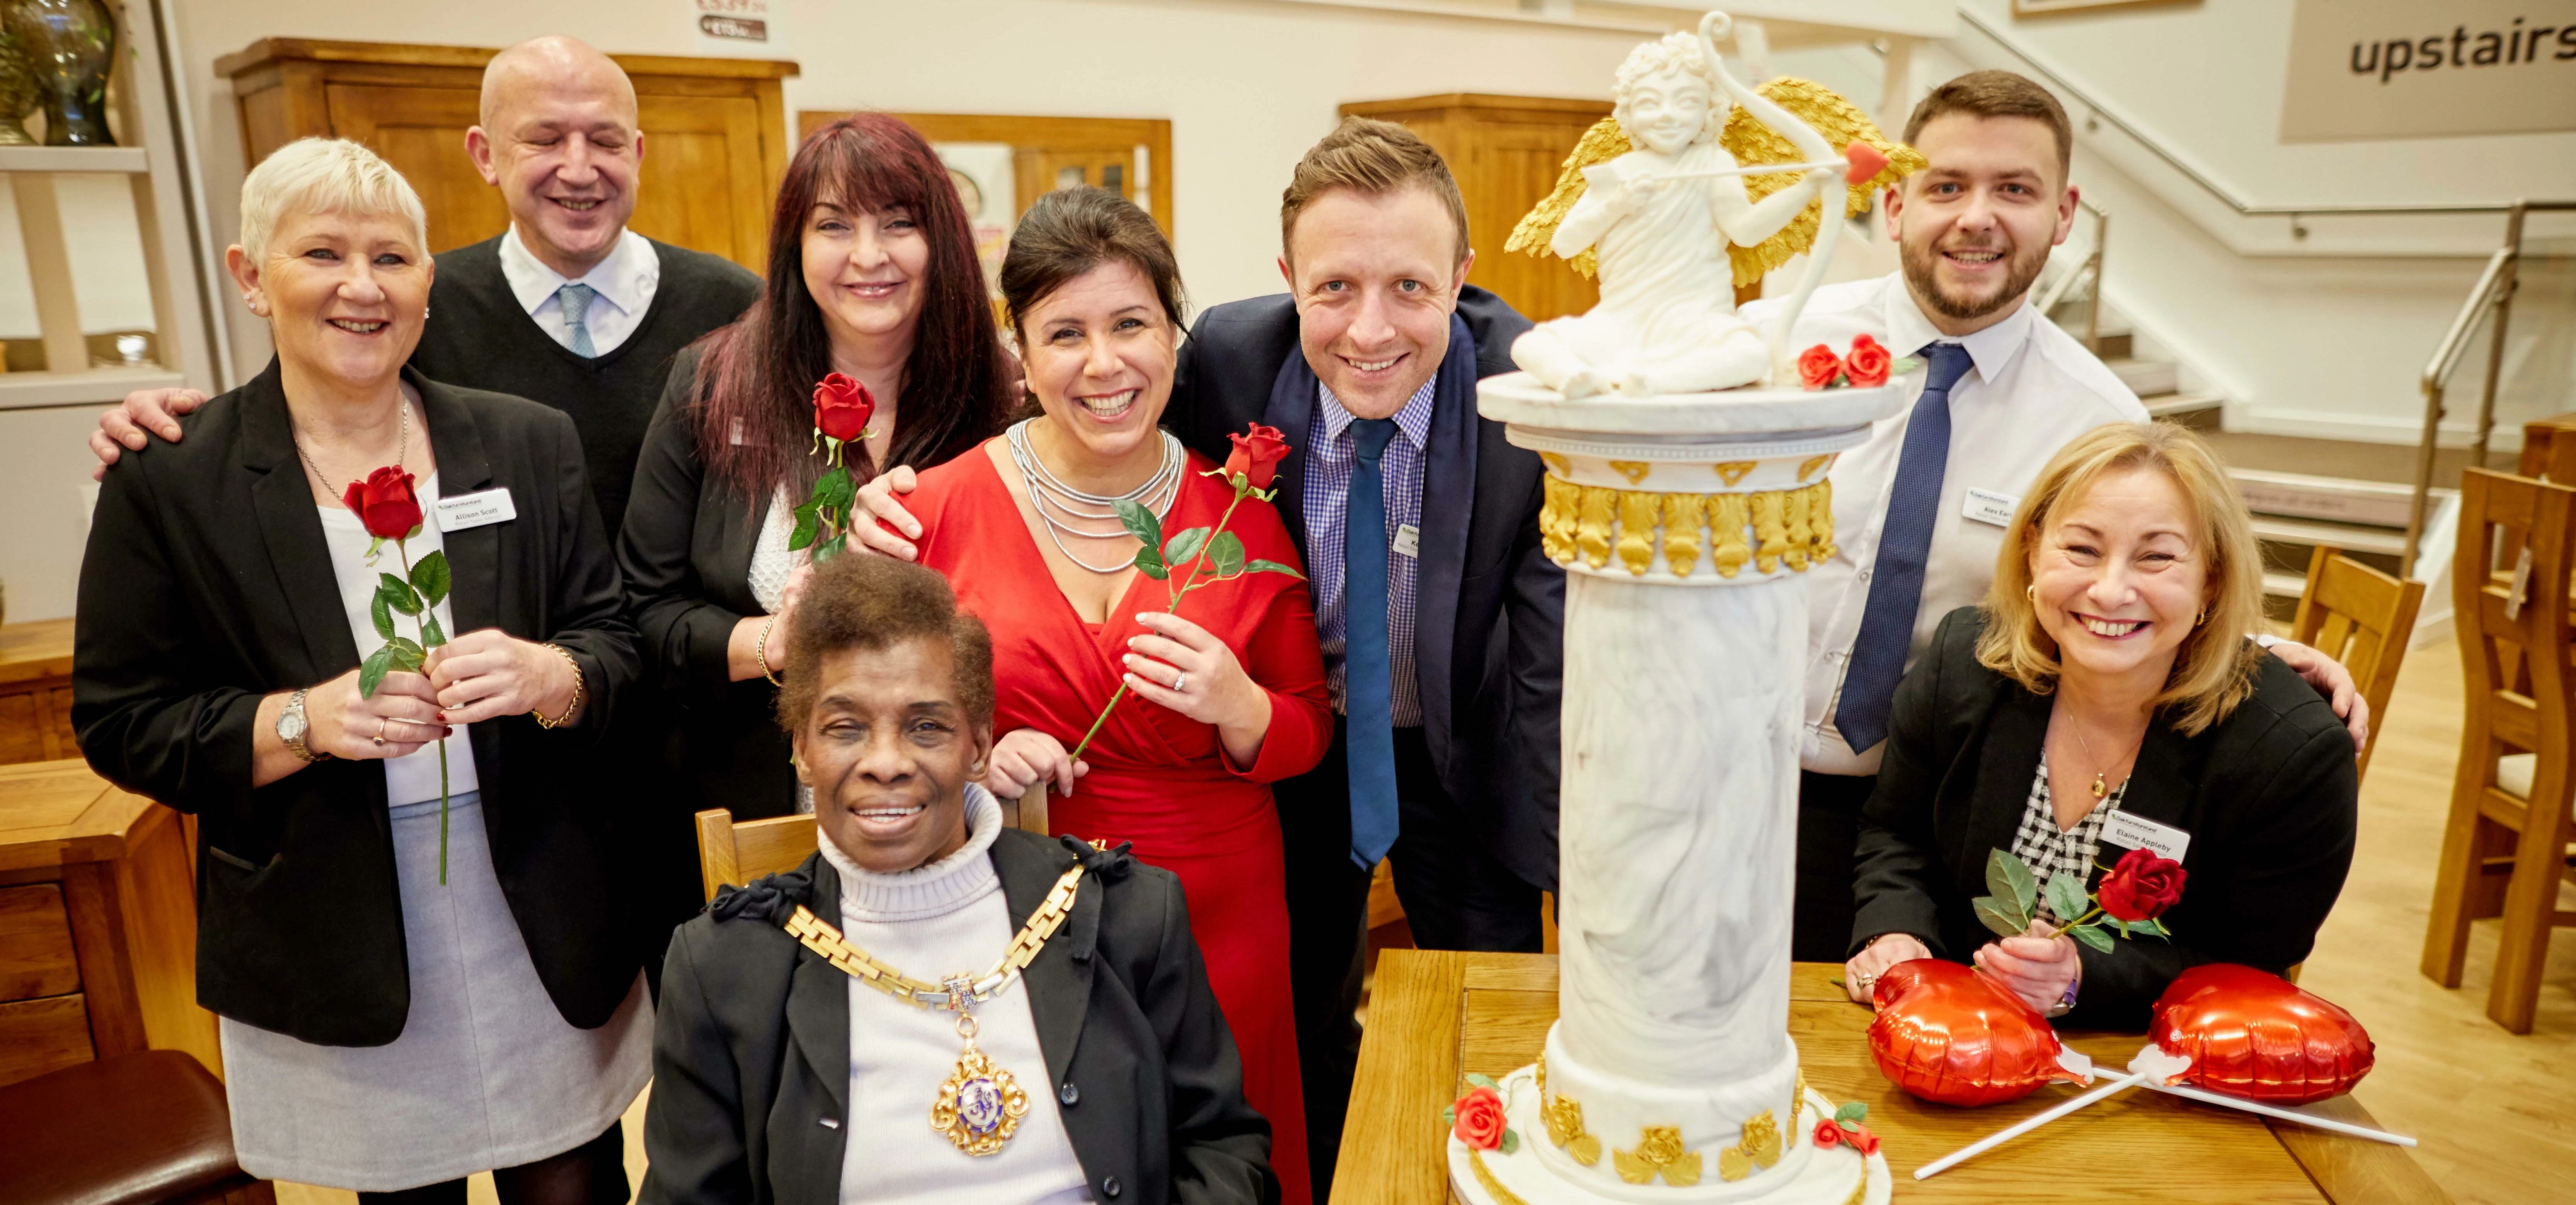 Centre - Kevin Leach - store manager with Rose Dummer (in red) - Cake Artist and the Mayor of Maccle